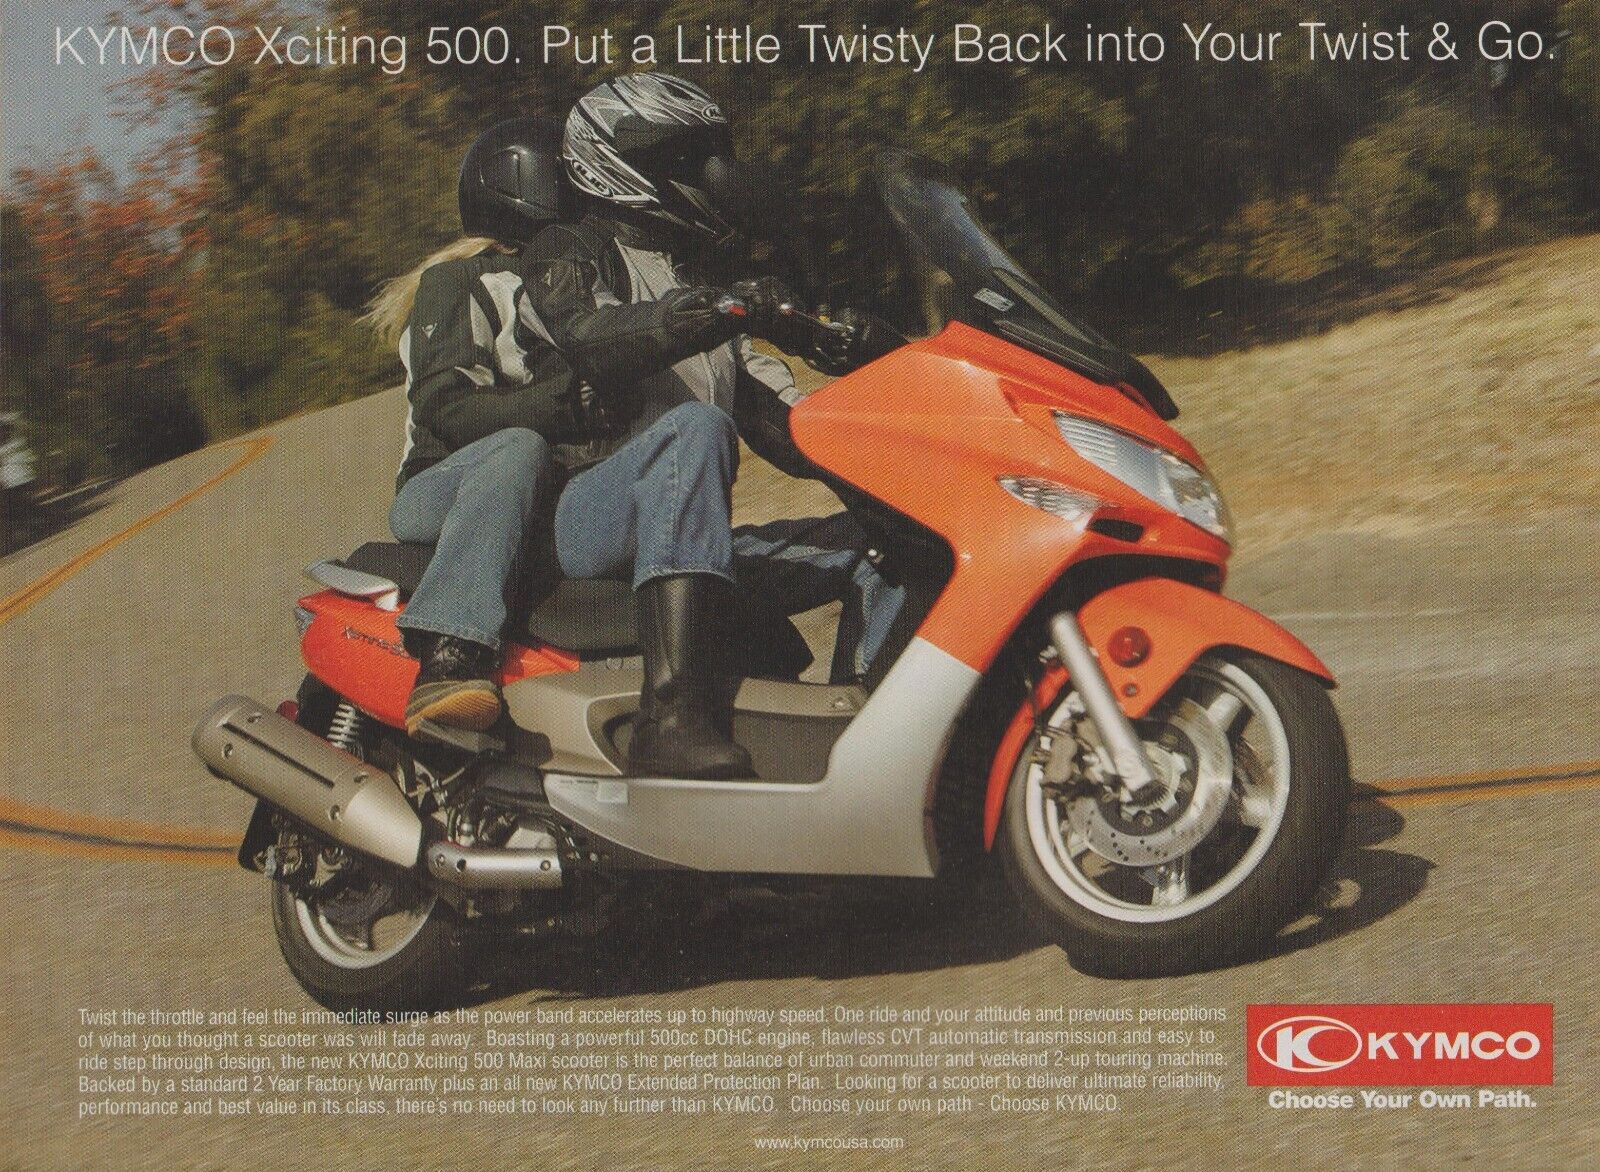 2008 KYMCO Xciting 500 Maxi Scooter - Twisty Back In Twist & Go - Print Ad Photo